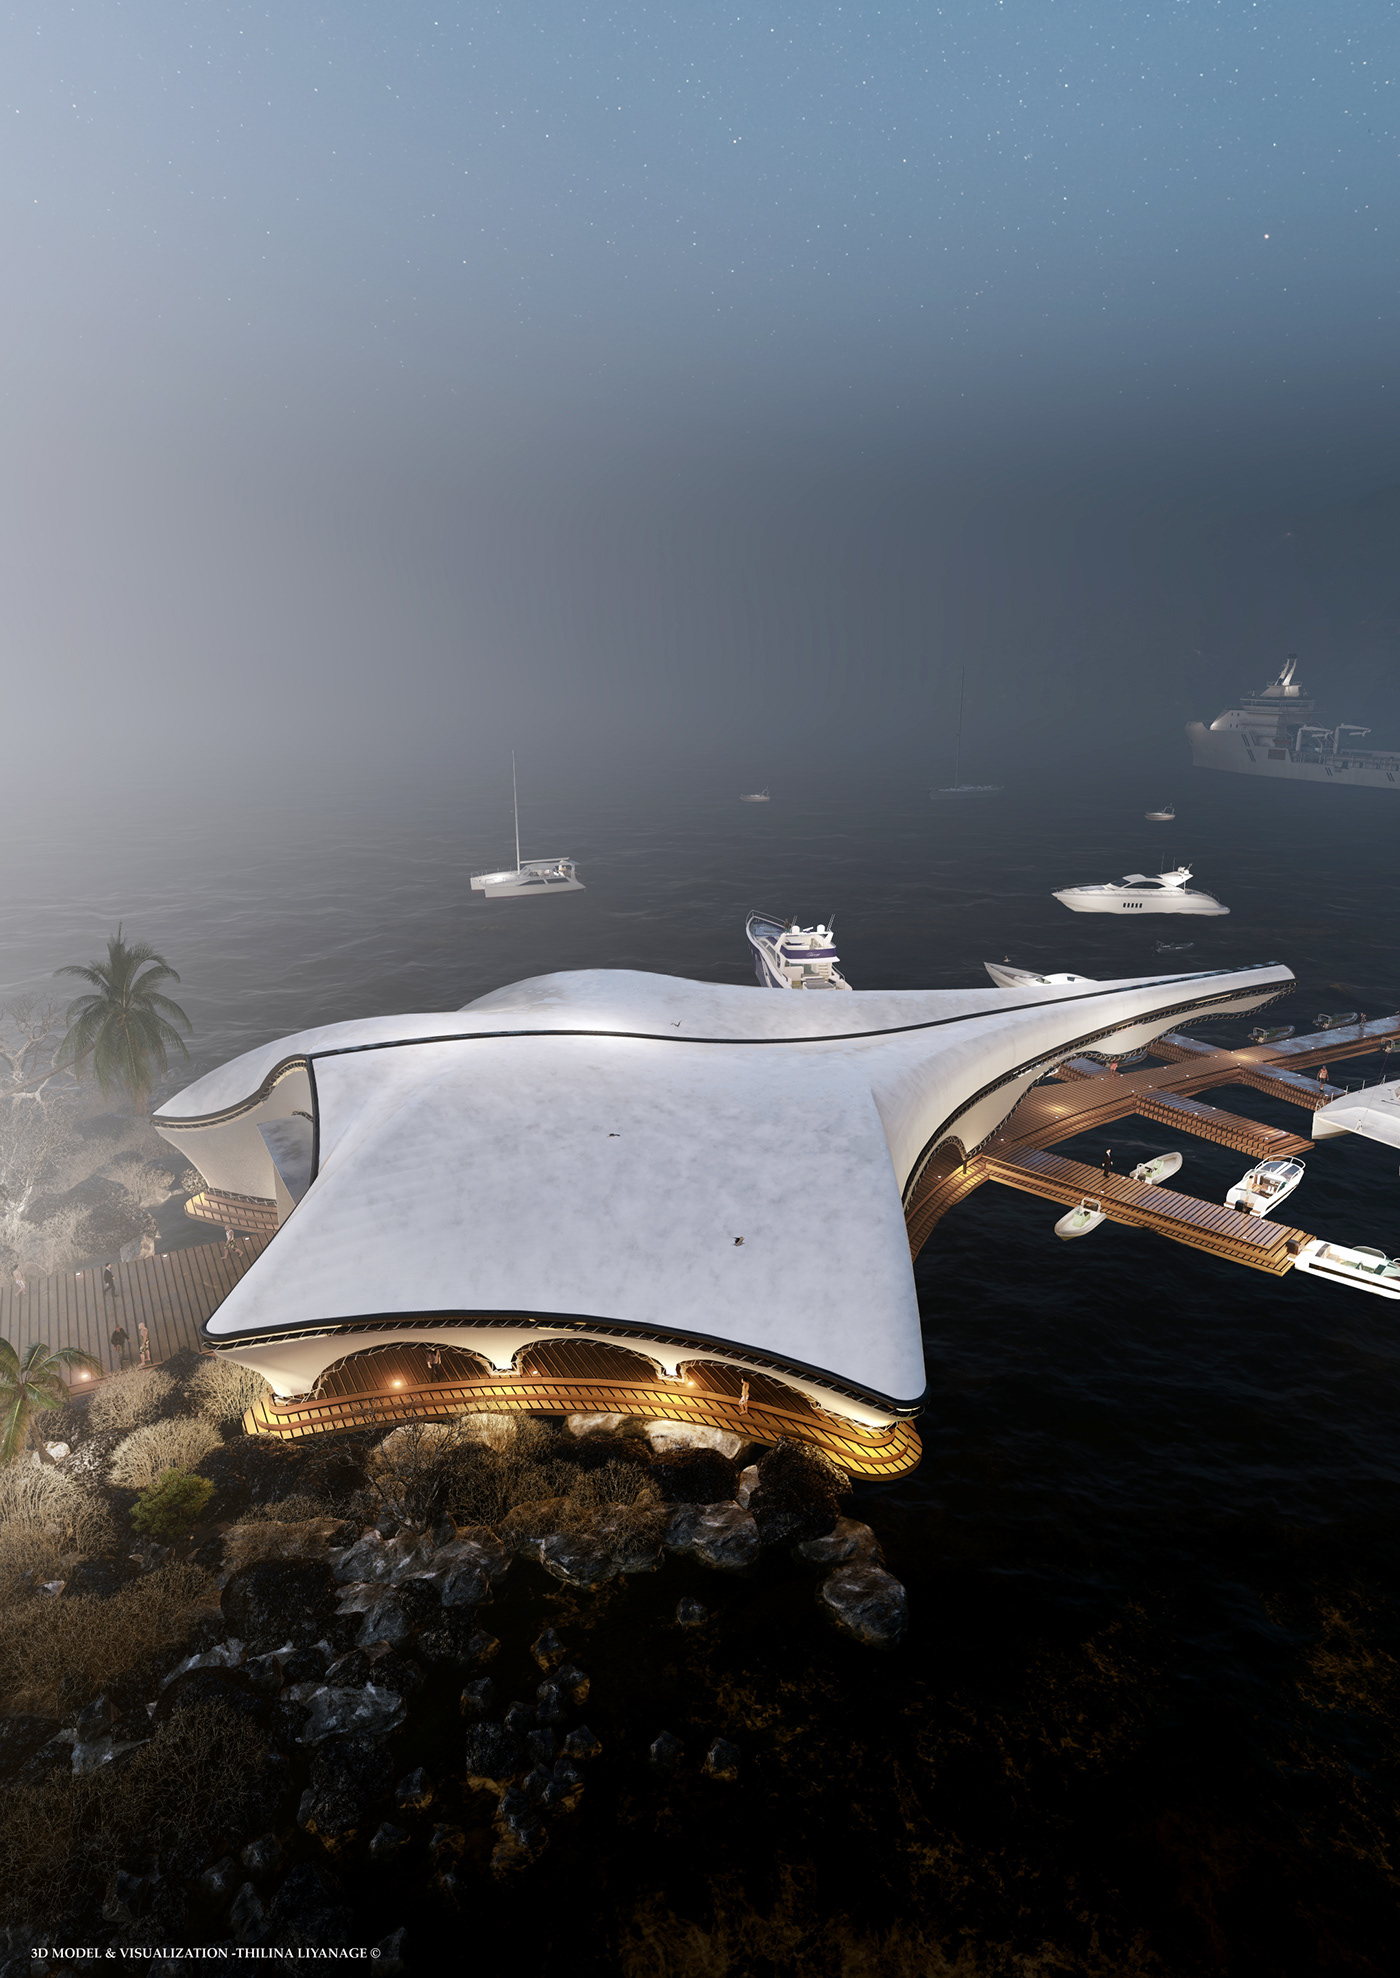 Architectural Concepts architecture boat house marine pier thilina liyanage yacht YACHT CLUB